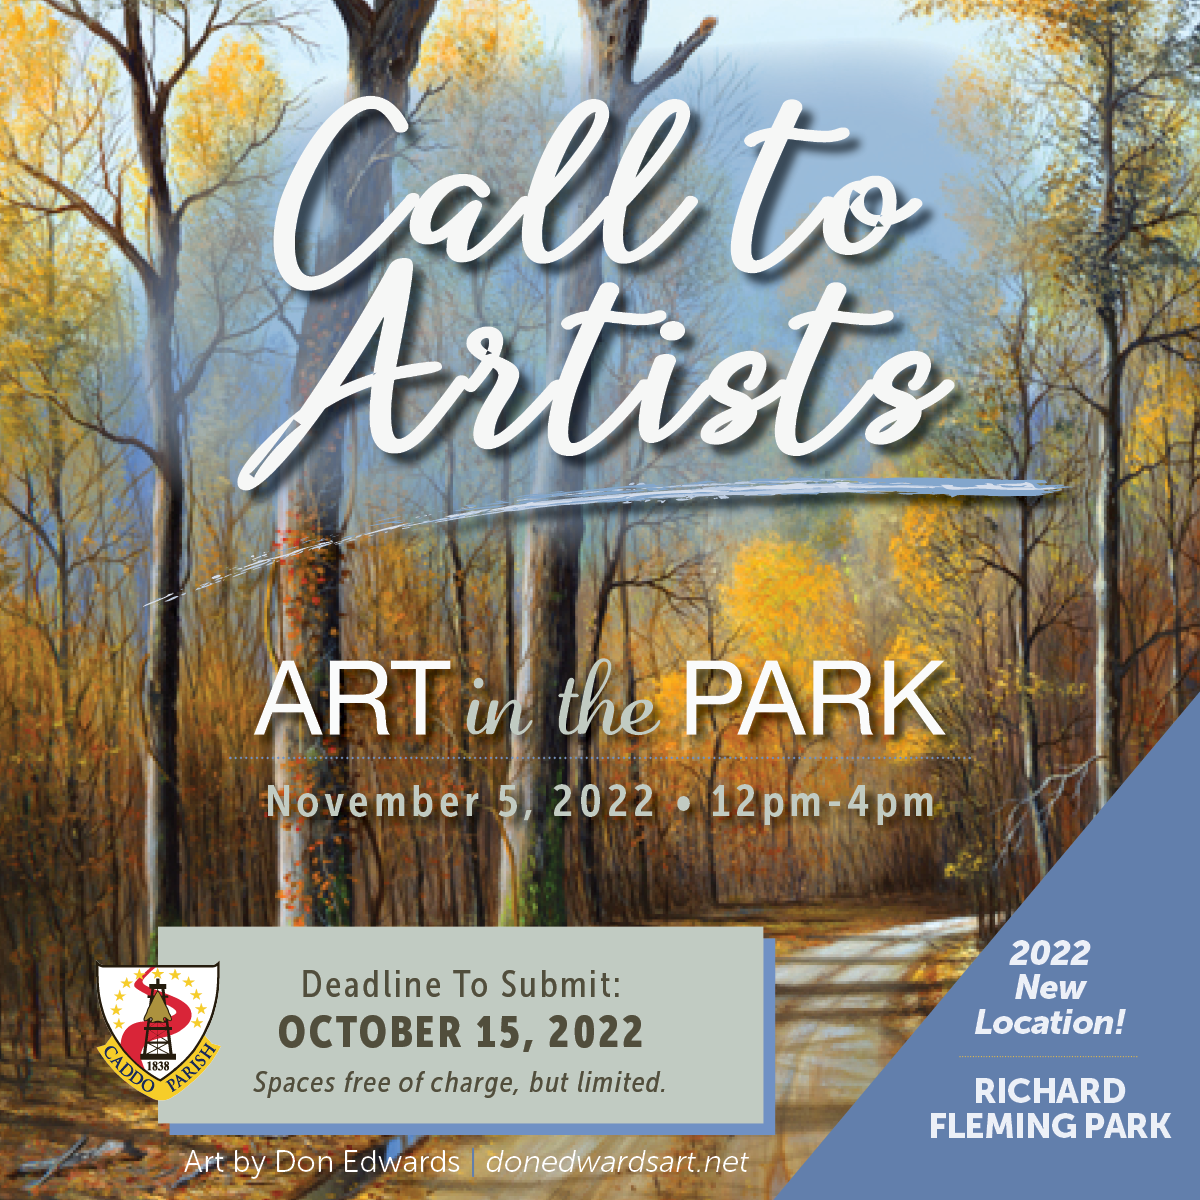 Featured image for “Call for Artists at Art in the Park to be held on Saturday, November 5, 2022”